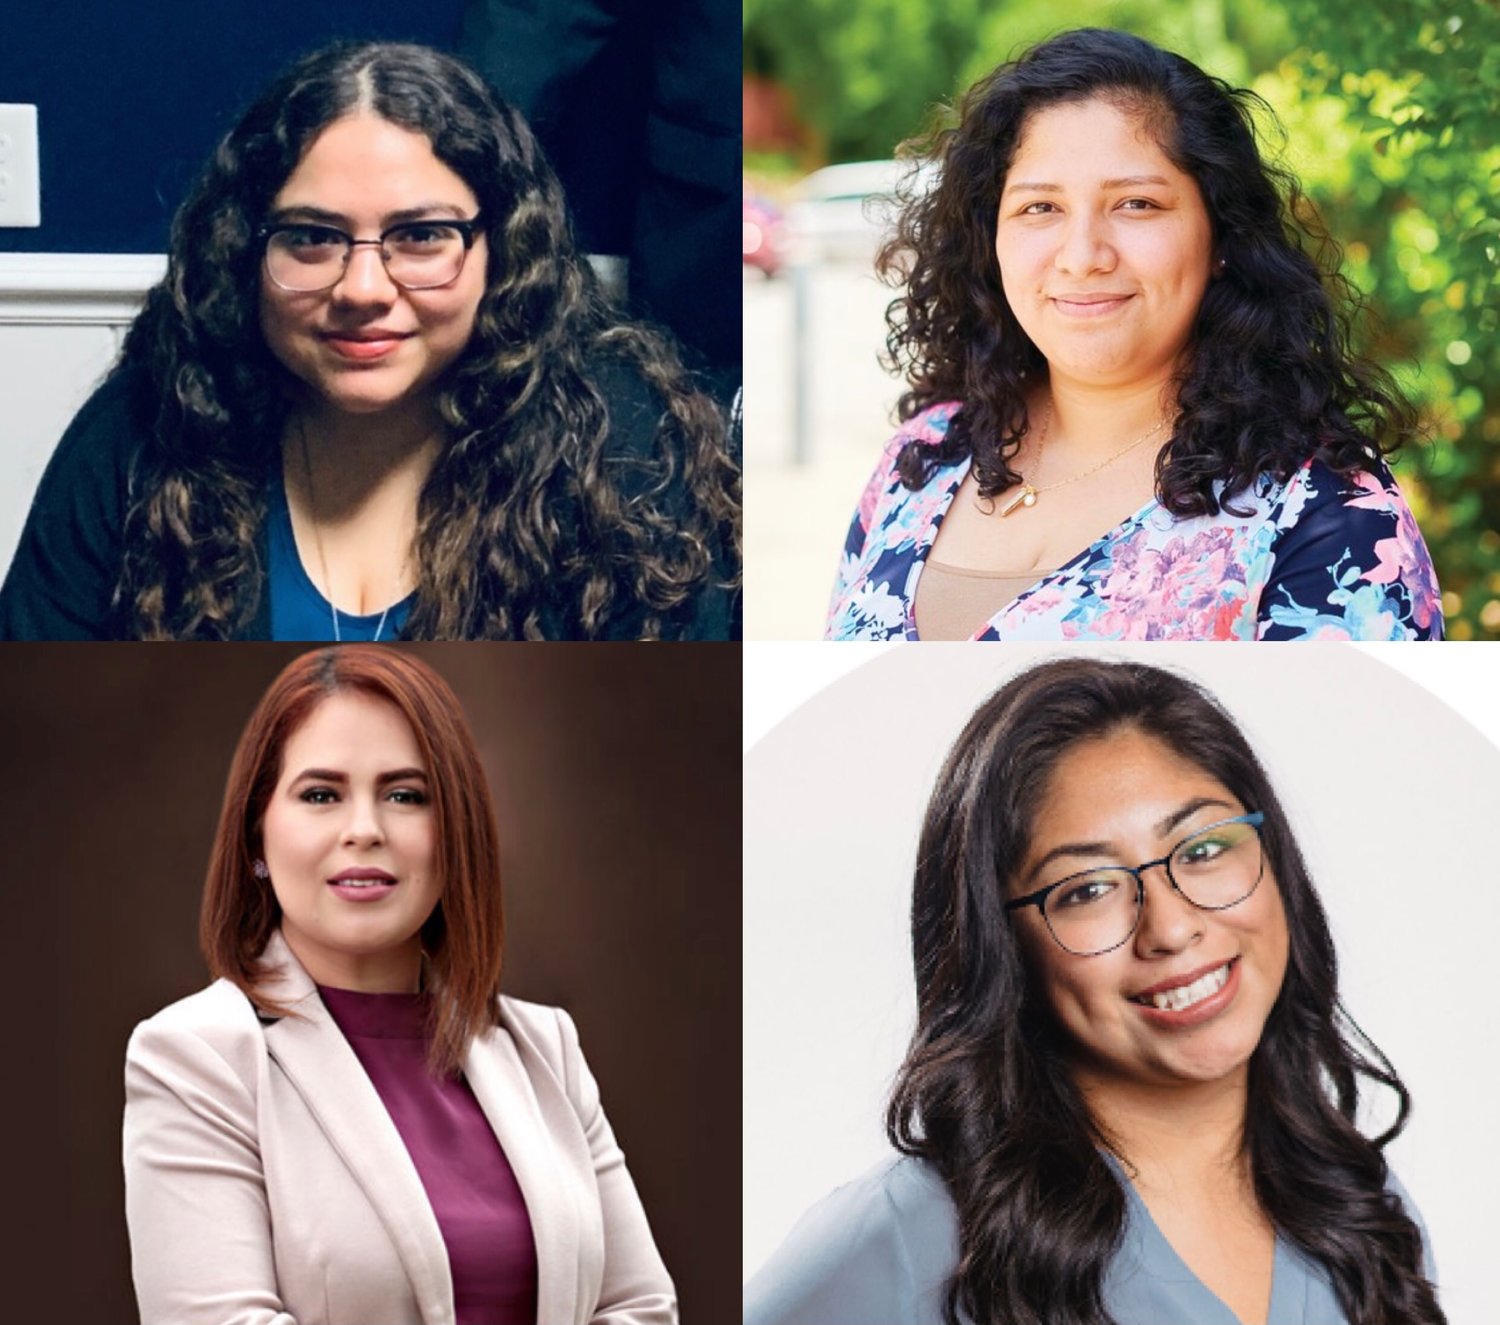 Appointees pictured from left to right, top to bottom: Shirley Villatoro, Hannia Benitez, Norma Jisselle Perdomo and Victoria Navarro. Appointees not pictured: Carlos Simpson, Danubio Vazquez Rodriguez and Norma Hernandez.